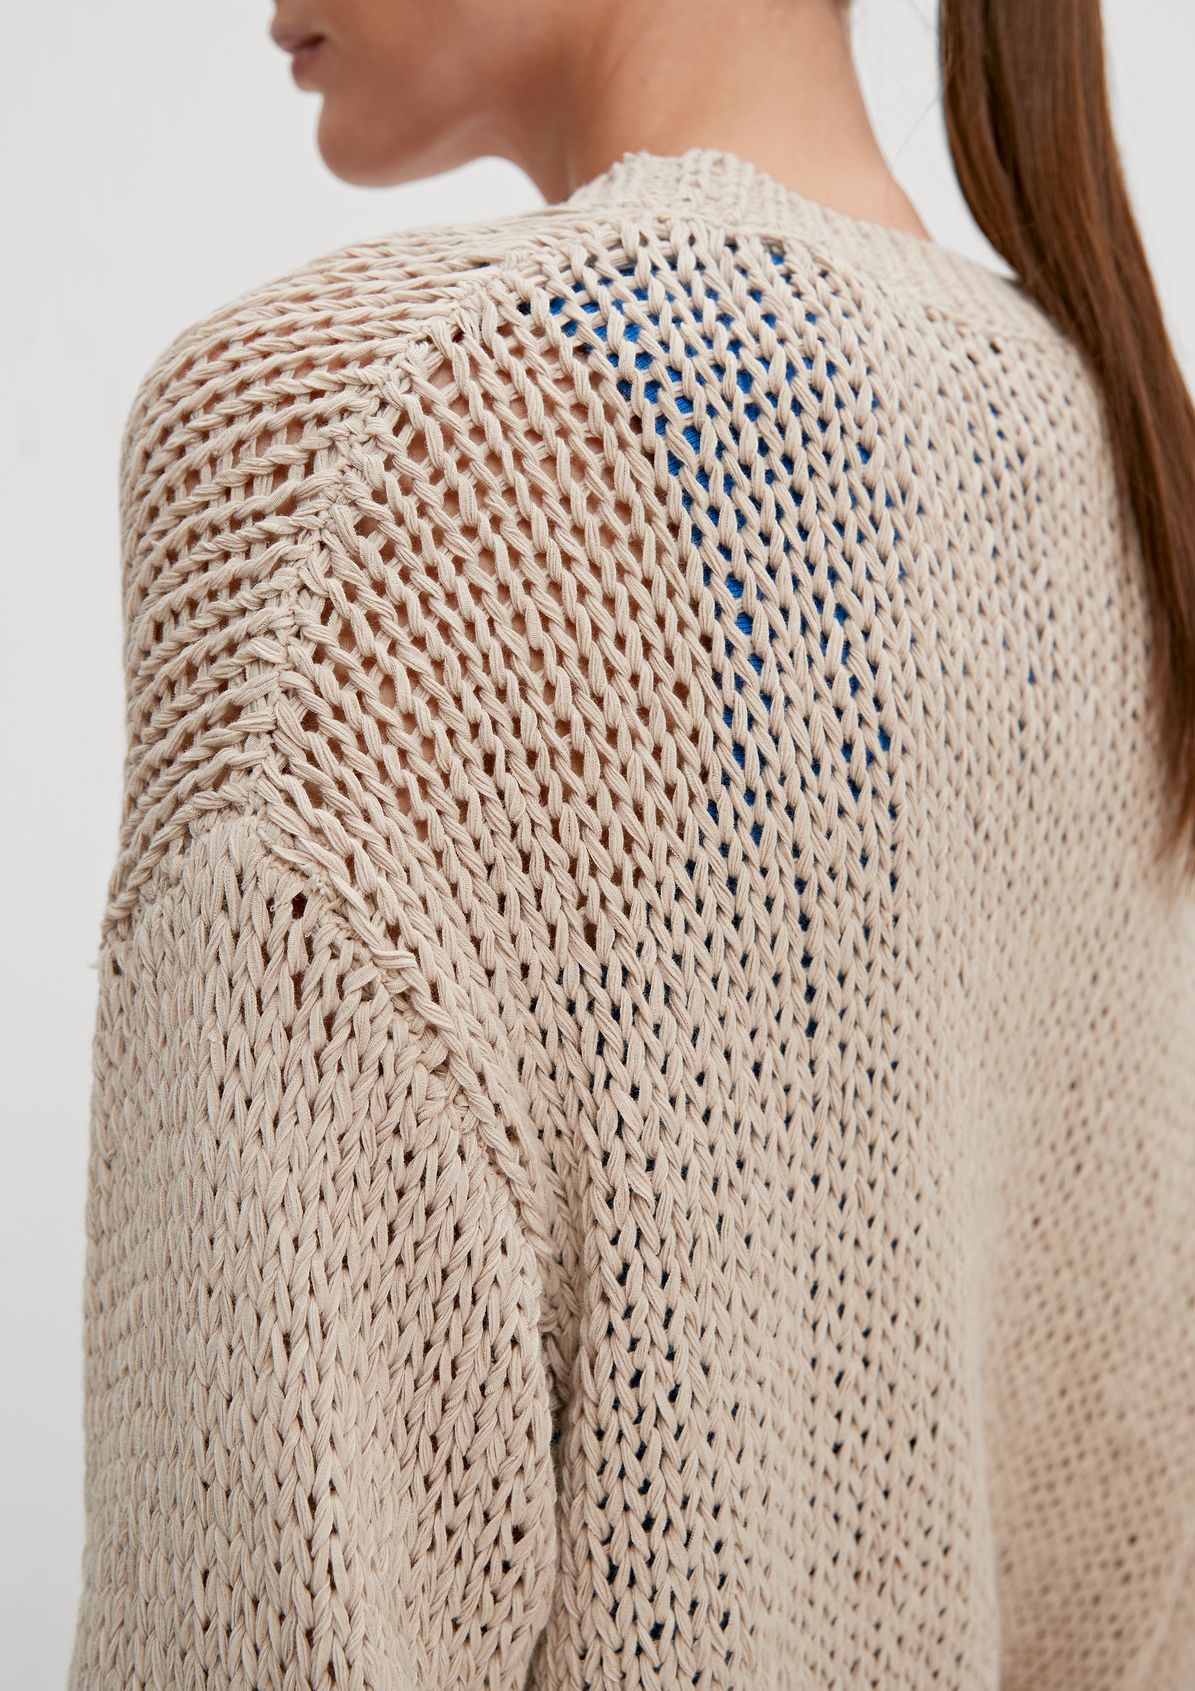 Summery knitted cardigan from comma